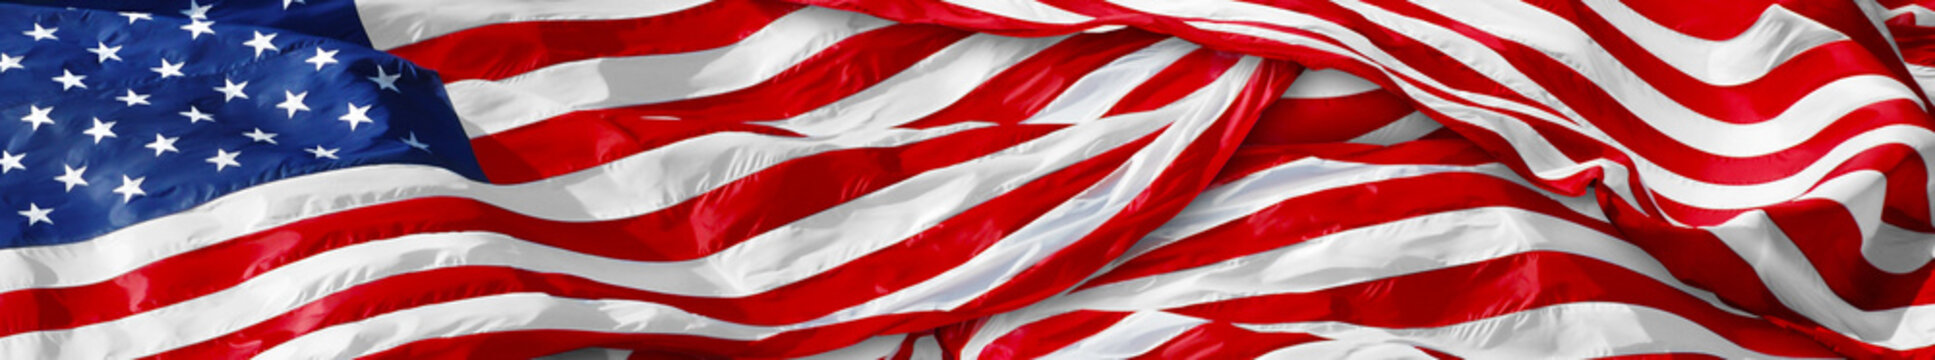 Panoramic US American Flag. National flag of the United States of America.